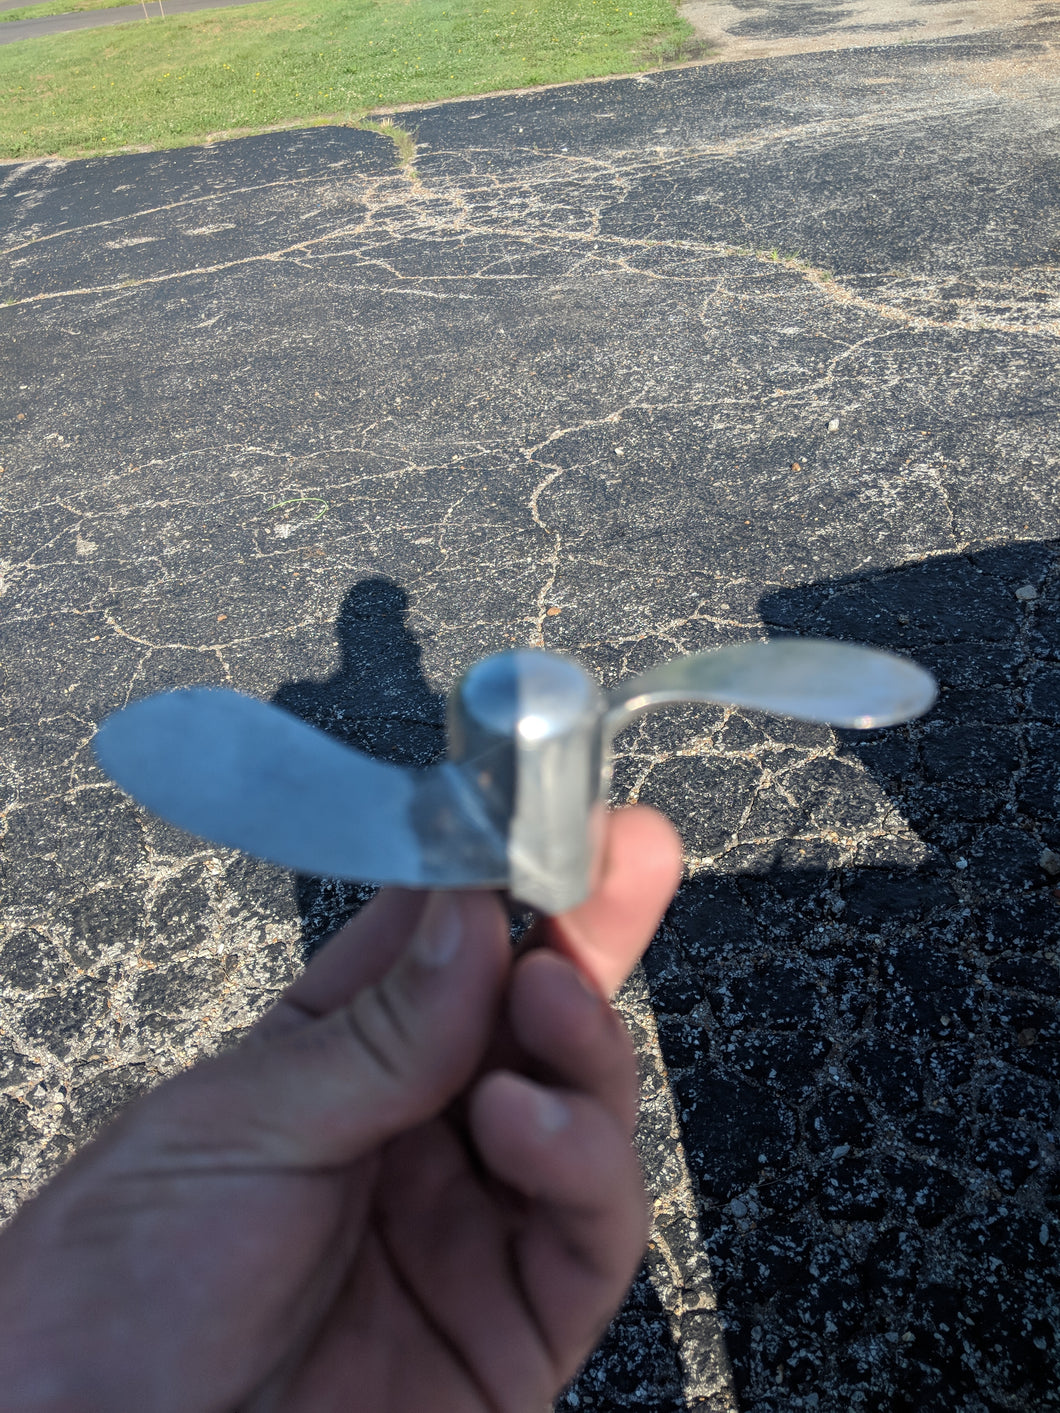 Replacement Propeller for the 1hp Ice Ripper